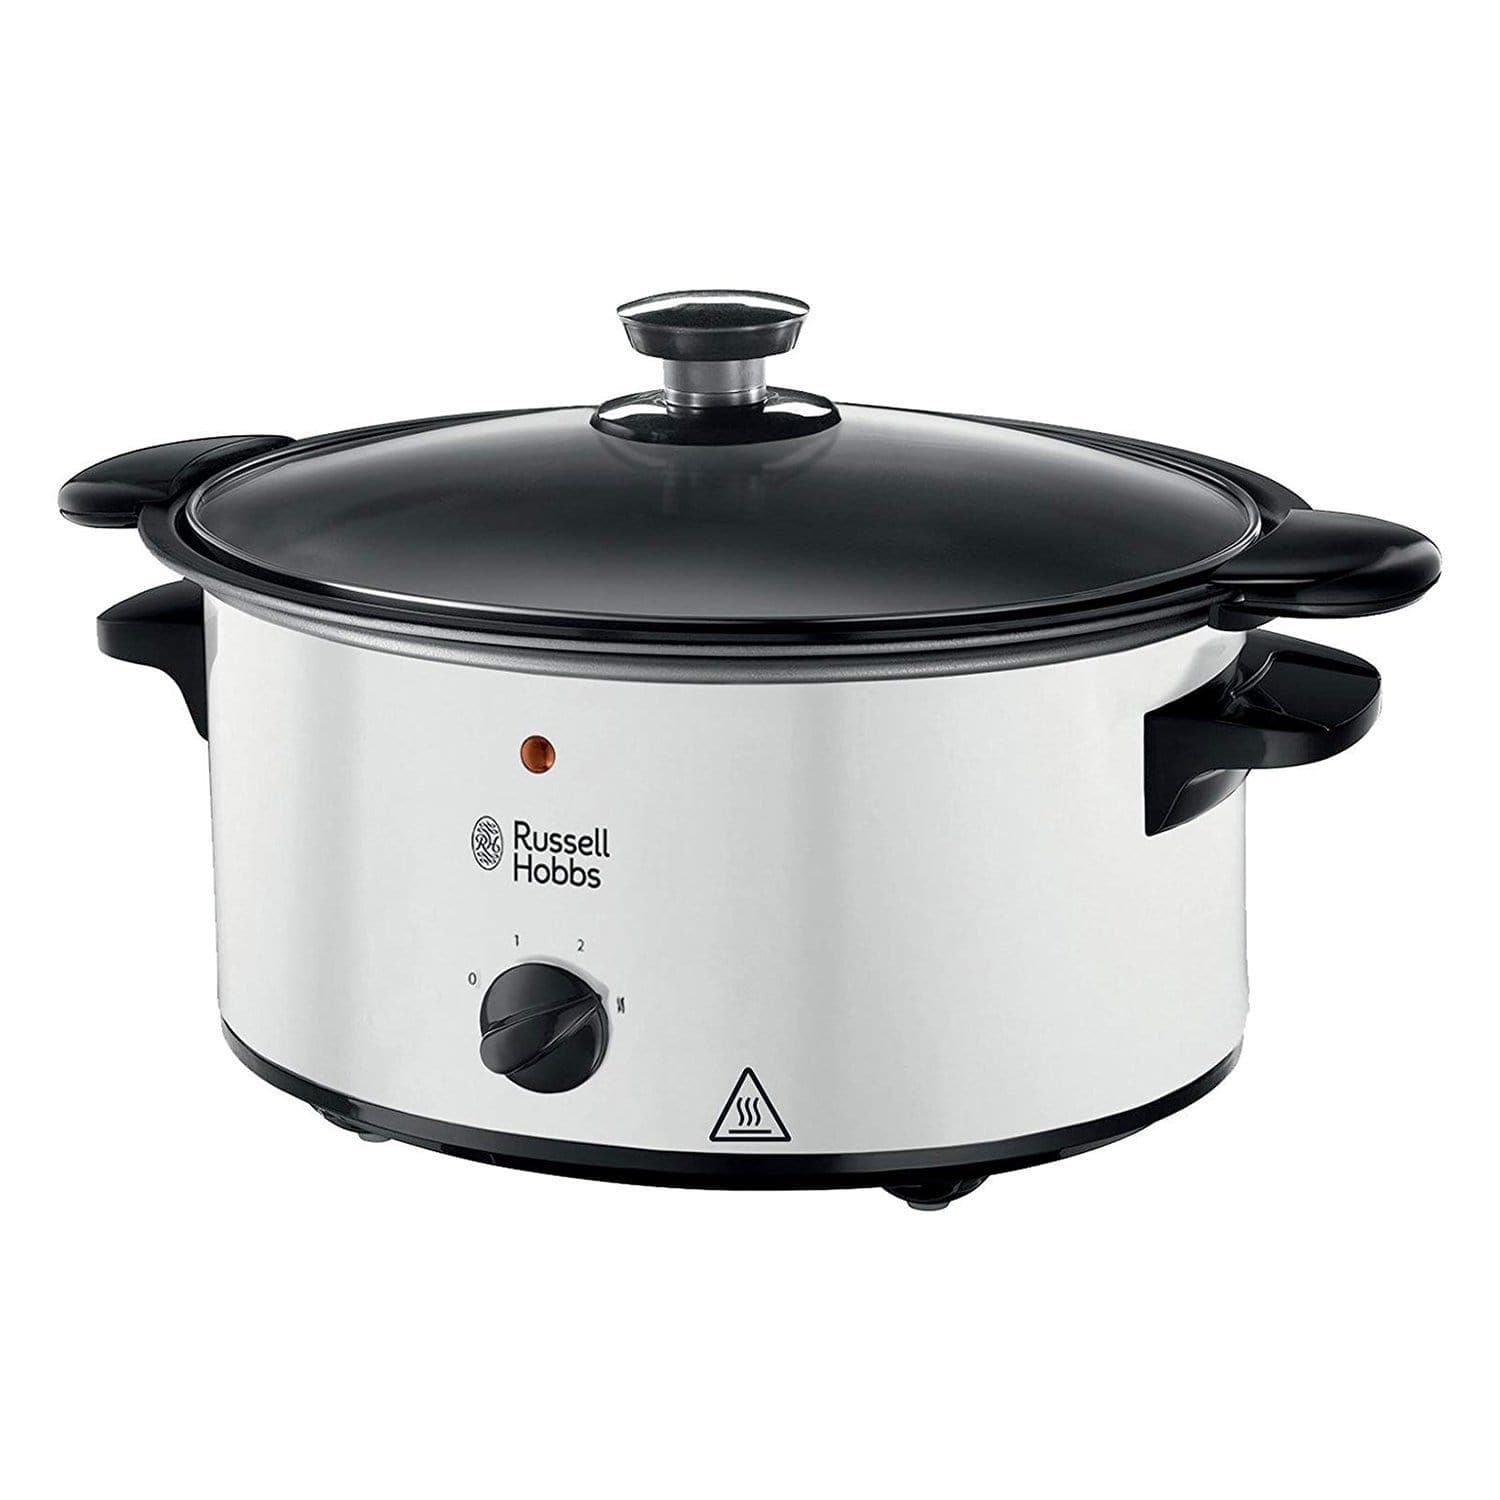 Russell Hobbs 1.7 Litres Slow Cooker - 23150 - Jashanmal Home